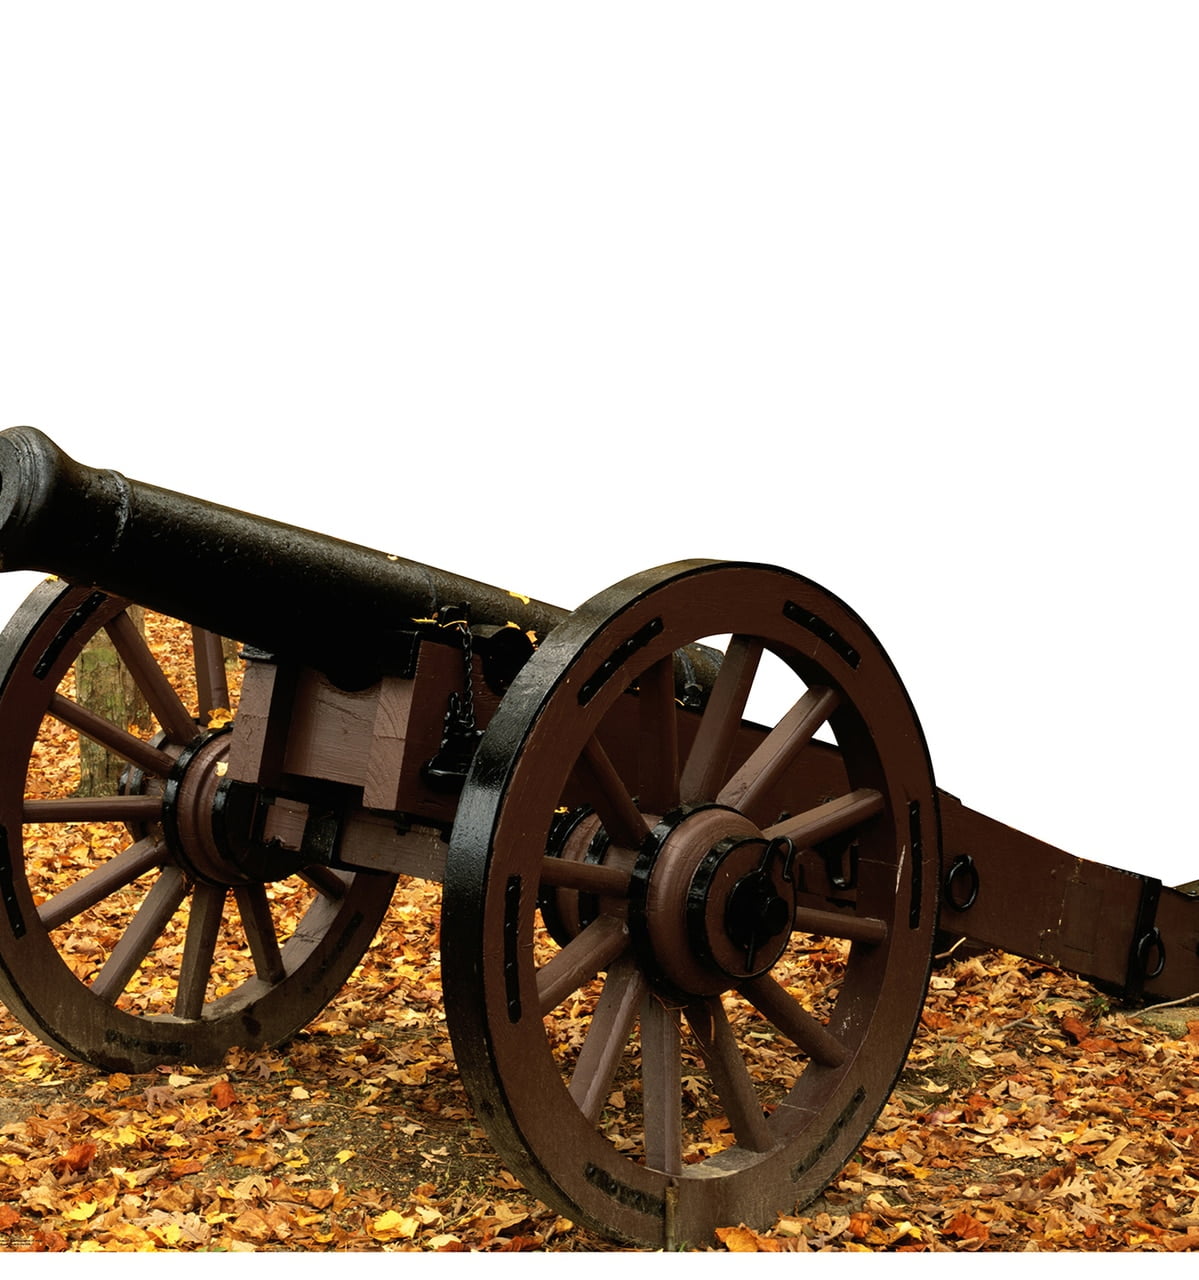 Picture of Advanced Graphics 1975 48 x 76 in. Civil War Cannon Cardboard Standup